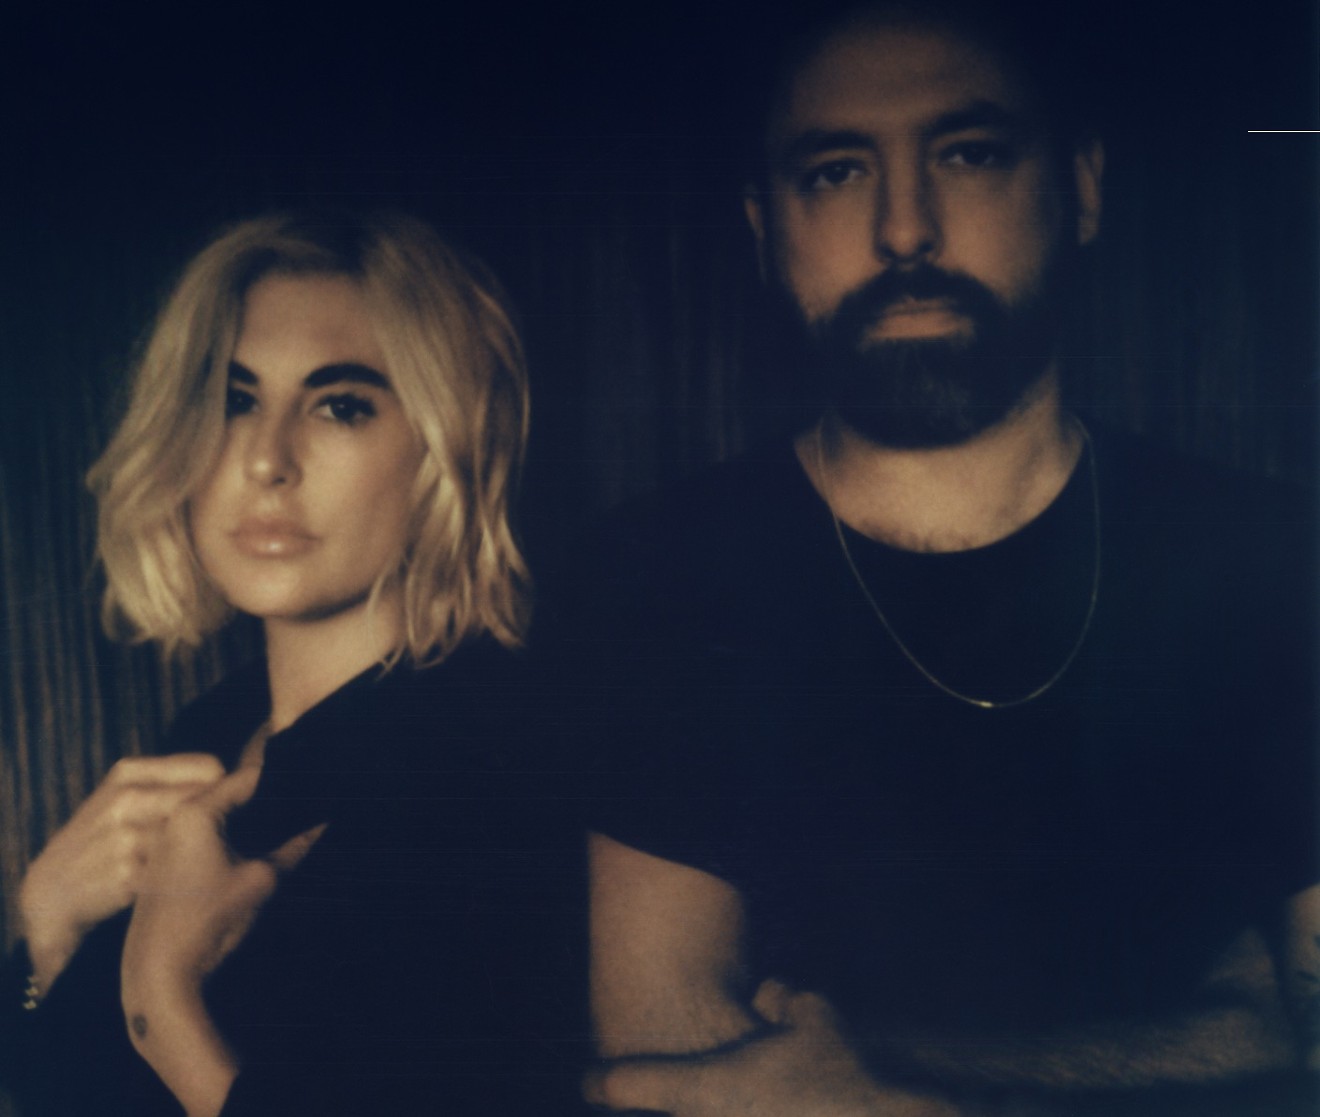 Phantogram overcame a tragedy, and now want to help others.